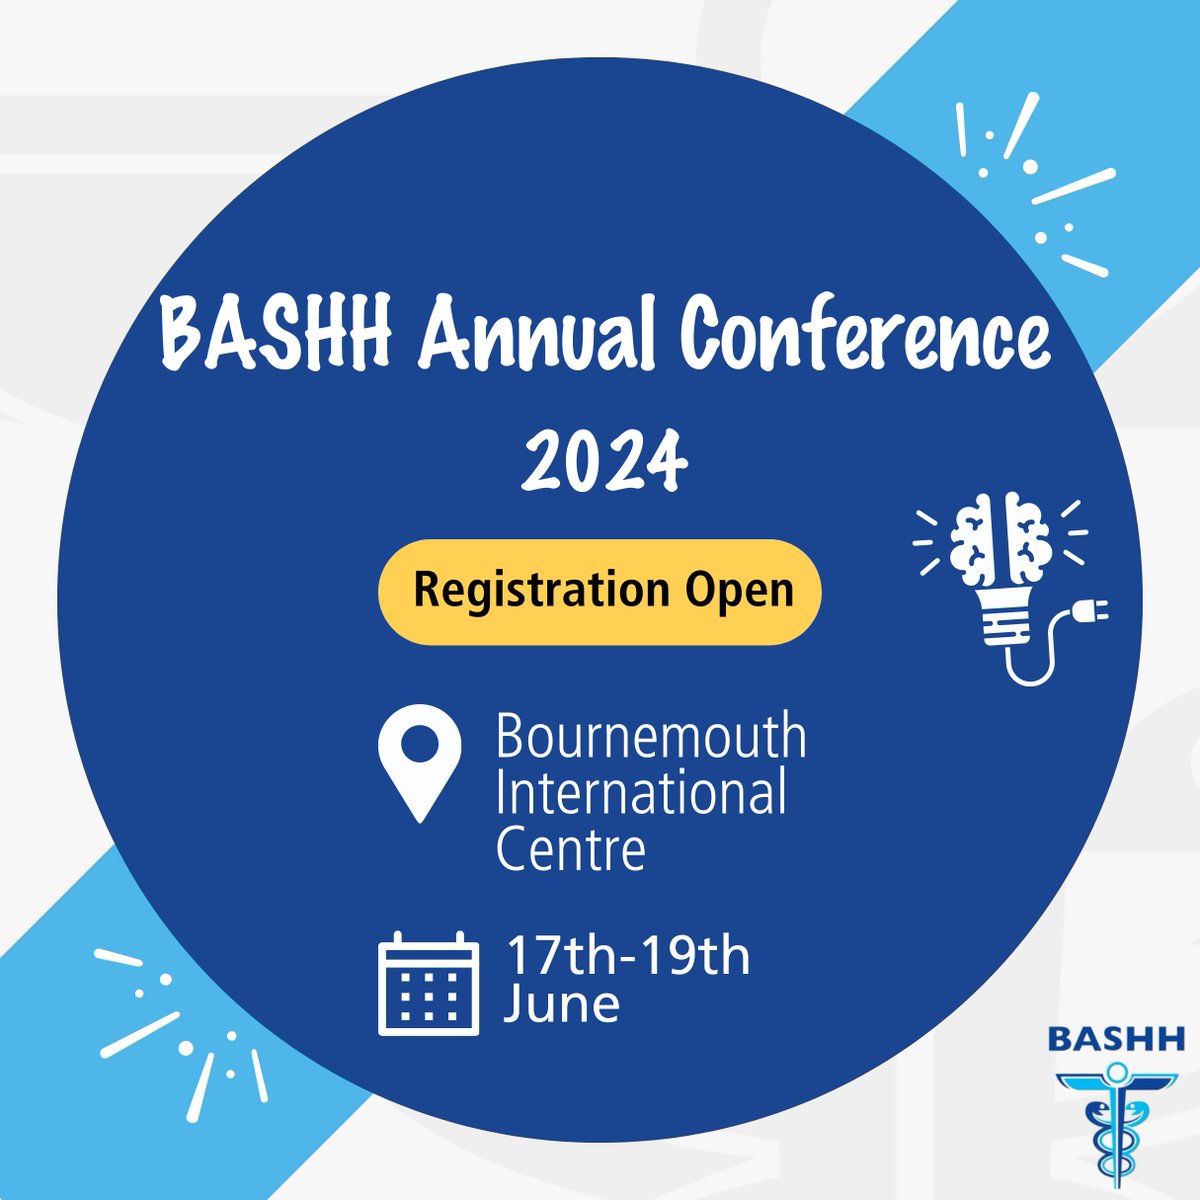 💥Registration for the BASHH Annual Conference is open! From the 17th-19th June, we will have three days full of informative expert speakers in the field of sexual health and HIV. Join us in Bournemouth - you don’t want to miss out! #BASHH2024 Register ➡️…